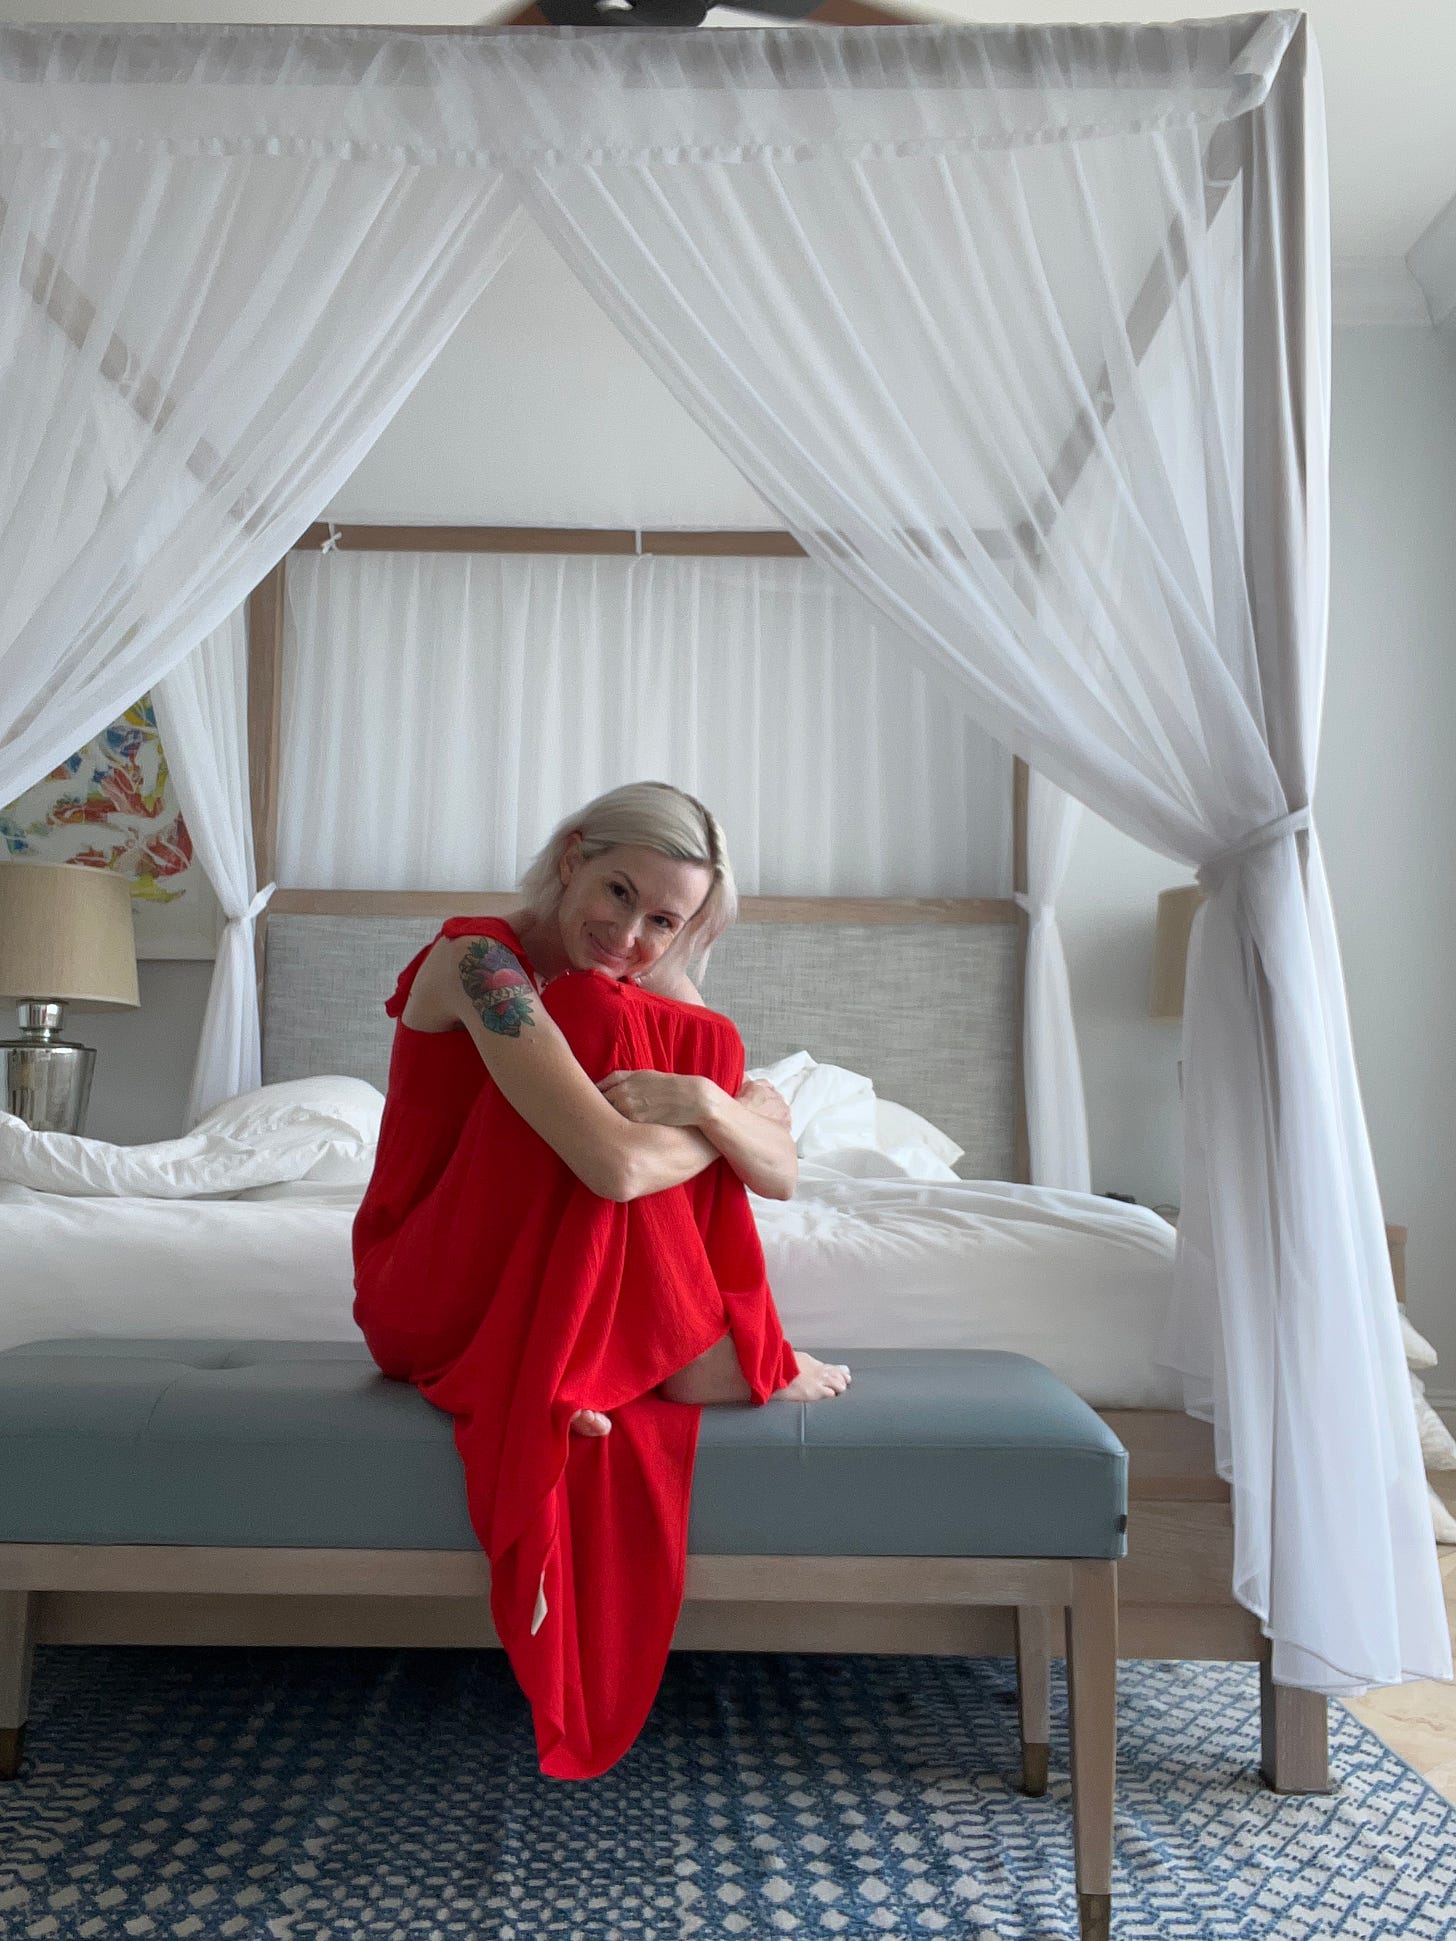 A white woman with blonde, chin-length hair, dark eyes, and a colorful tattoo on her left arm, sits in a bright red dress, knees pulled up to her chin and feet bare, on a bench in front of a white, four poster unmade bed, drapped with sheer white fabrics. 